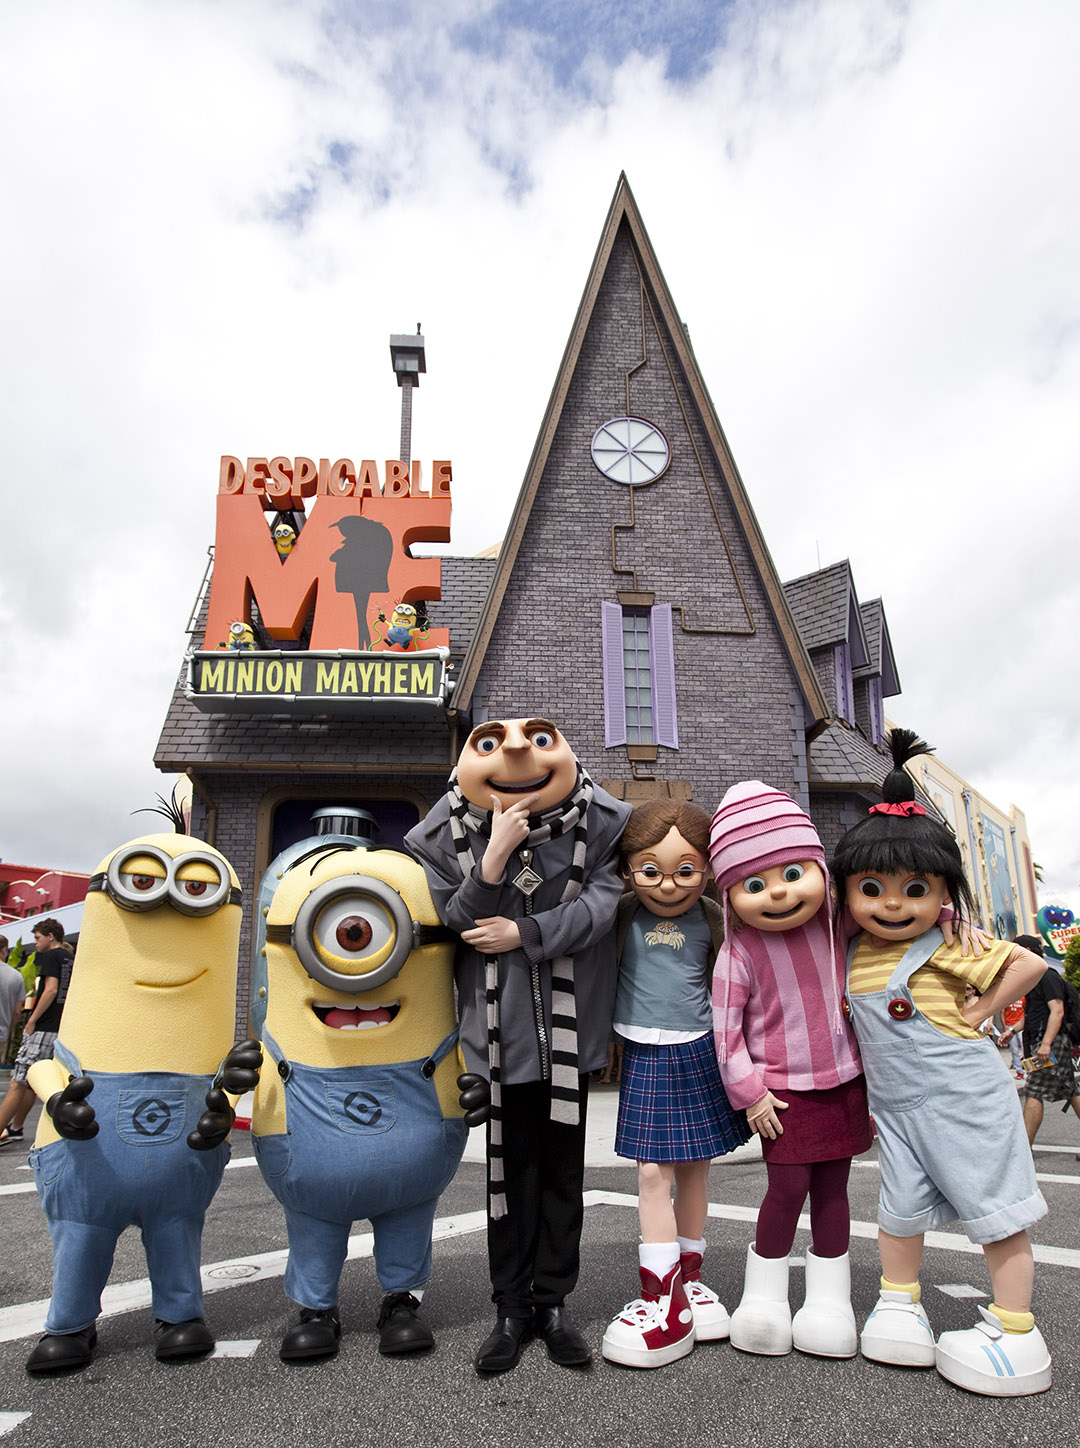 One of the most hilarious and heartwarming theme park experiences ever created – Despicable Me Minion Mayhem – is now open at Universal Orlando Resort, bringing minions, mayhem and tons of laughter to Universal Studios. The brand-new ride combines the outrageous humor and memorable characters from the hit Universal Pictures and Illumination Entertainment’s blockbuster film, Despicable Me, with an all-new storyline, incredible new animation and the latest 3-D technology to create a wildly-hysterical and unforgettable experience.